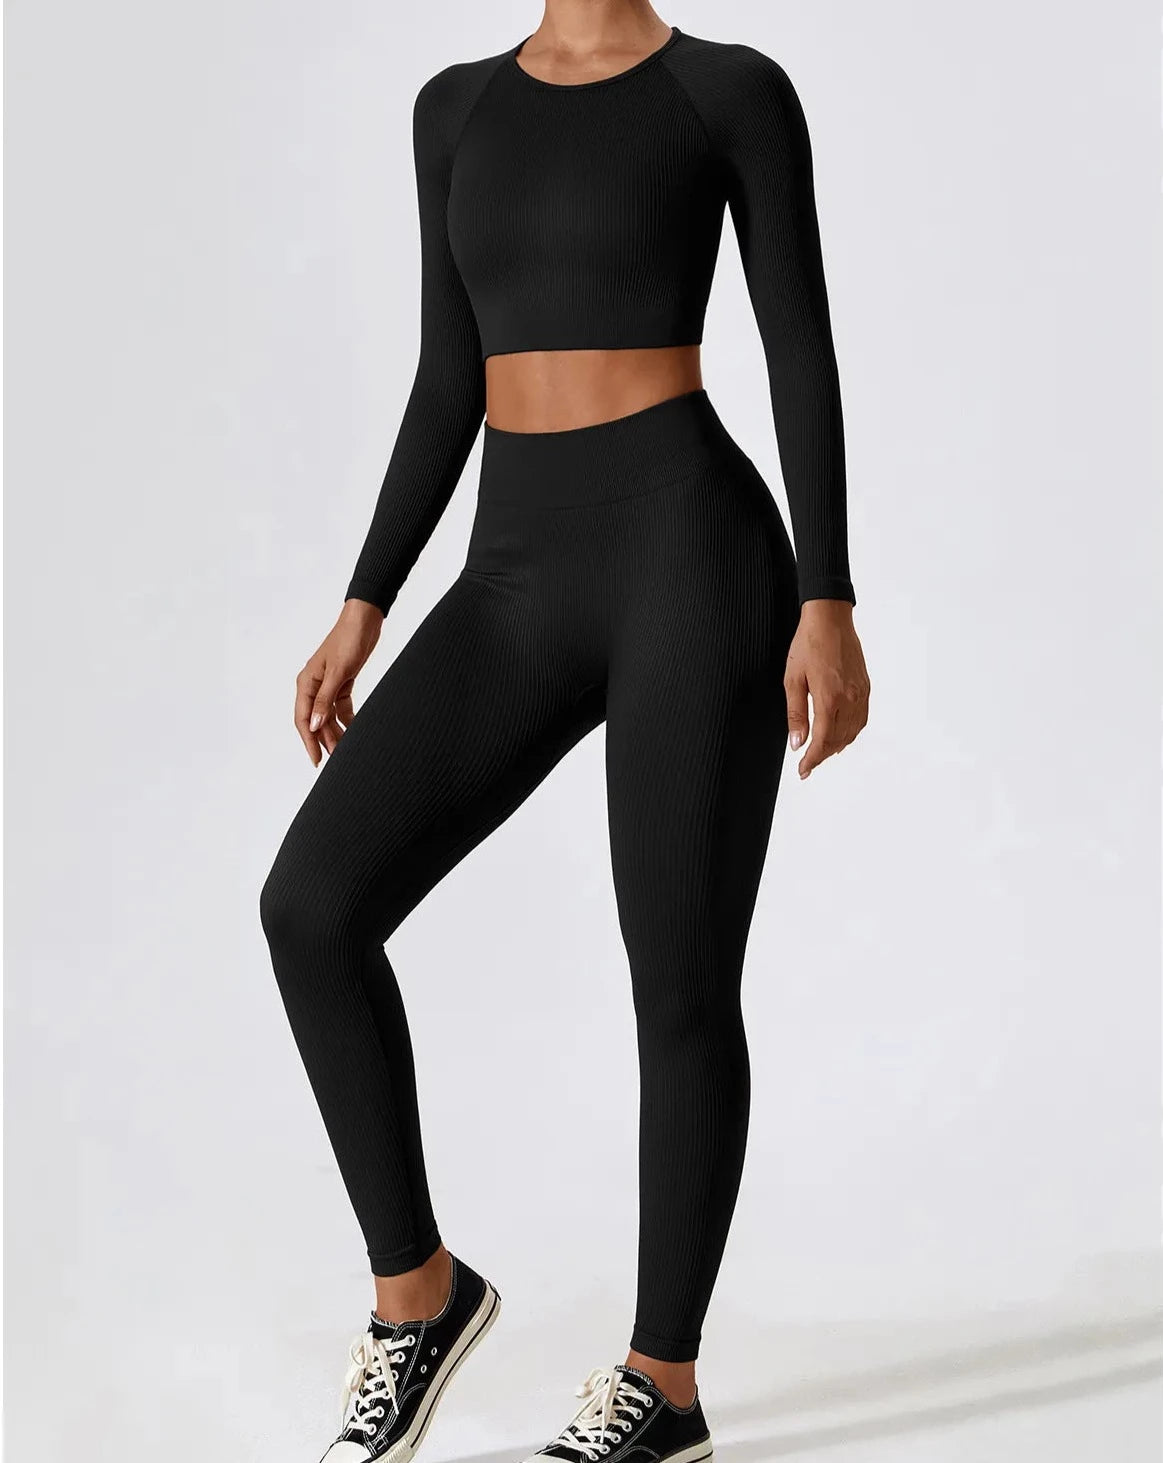 Chic Sports Top and Leggings Set